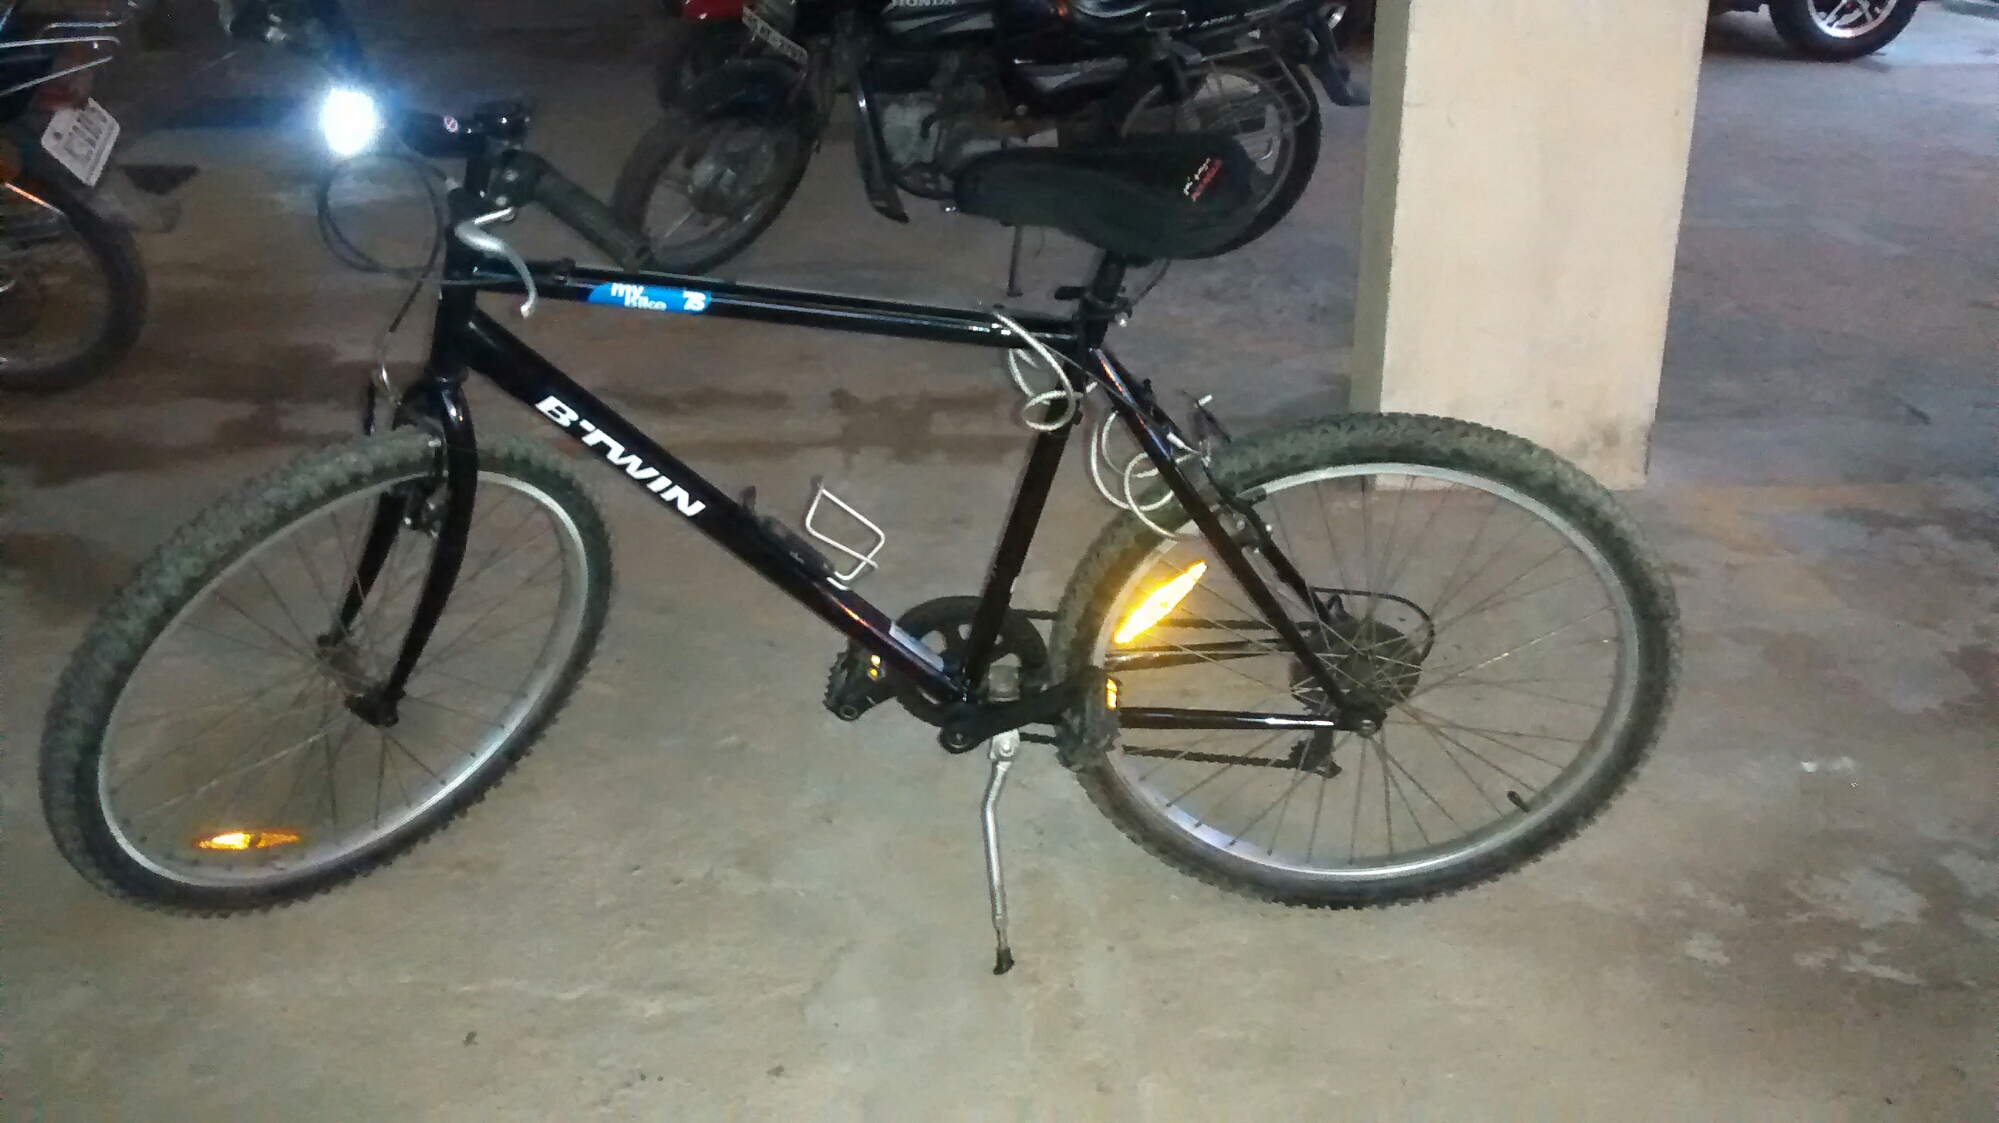 olx btwin cycle